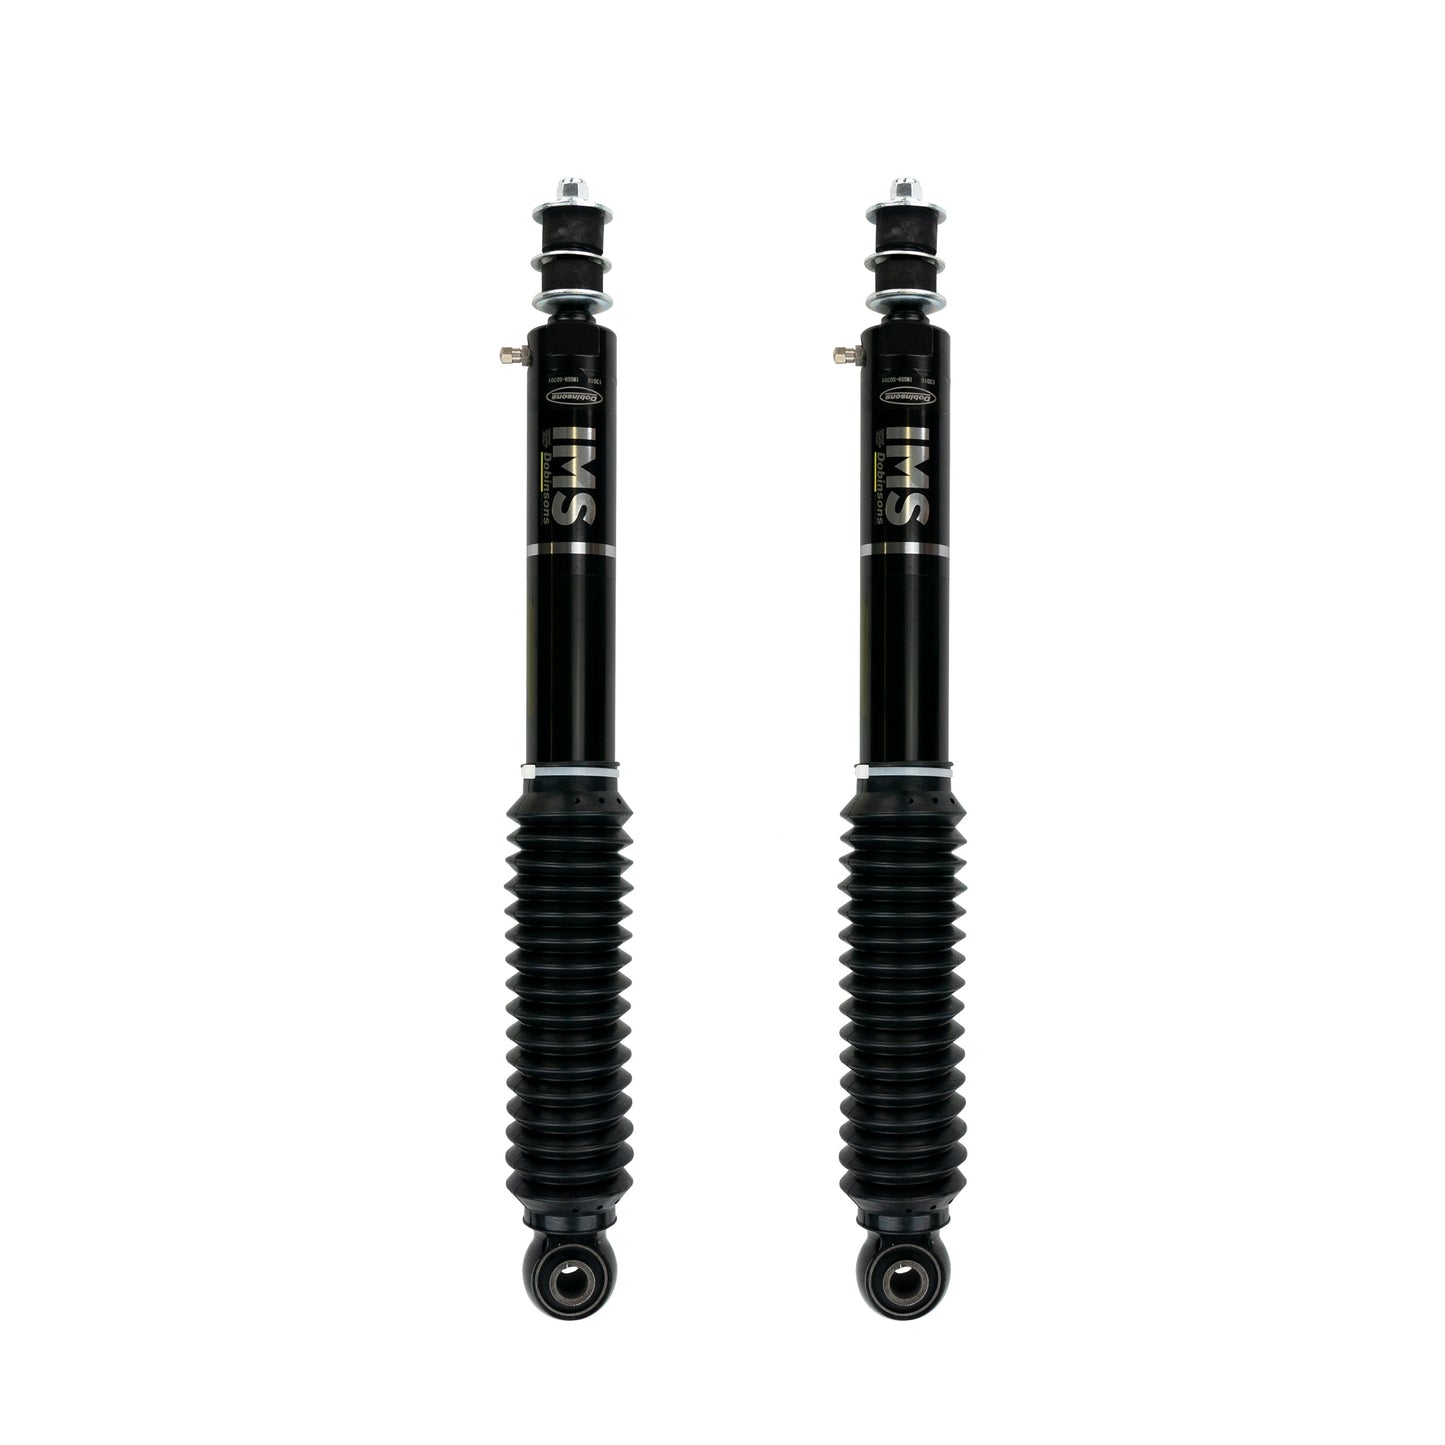 Dobinsons IMS Rear Shocks for Toyota Tacoma 1998 to 2004 and Hilux Revo(IMS59-50229)